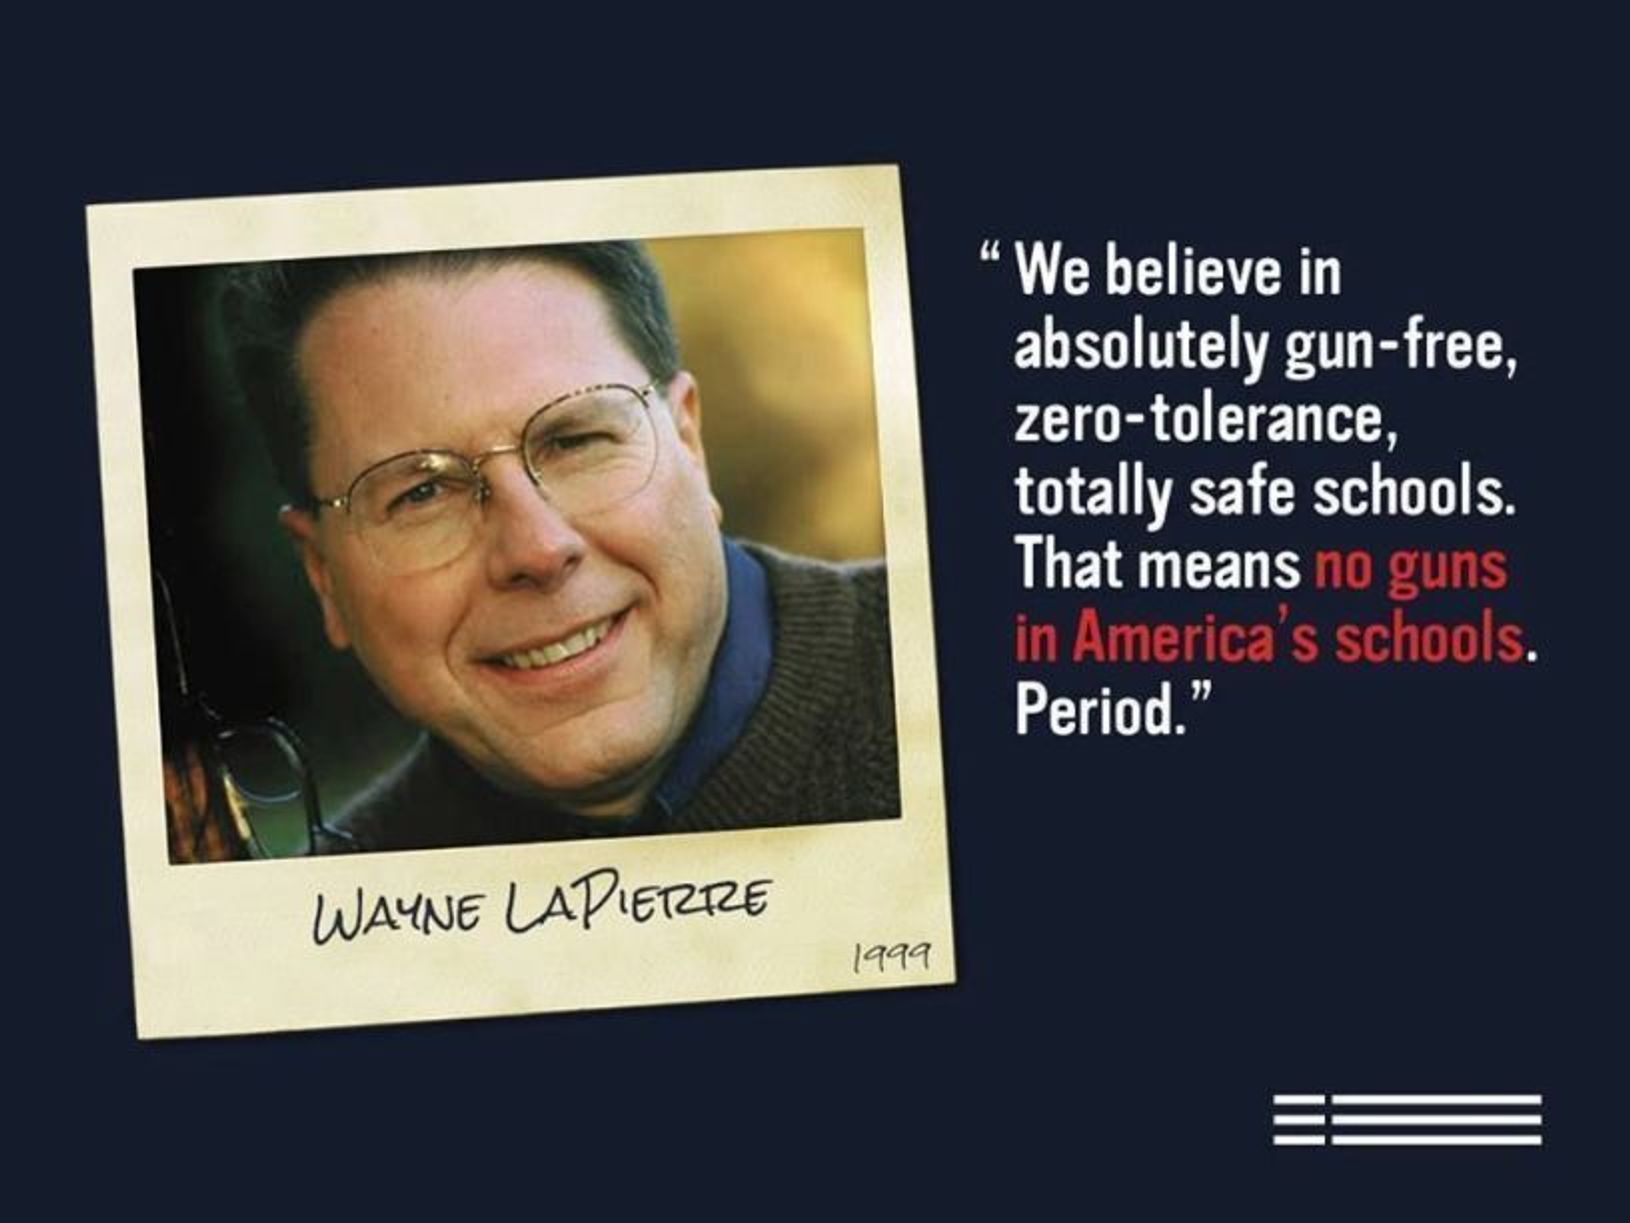 Images of Wayne LaPierre with quote "We believe in absolutely gun-free, zero-tolerance, totally safe schools. That means no guns in America's schools. Period."